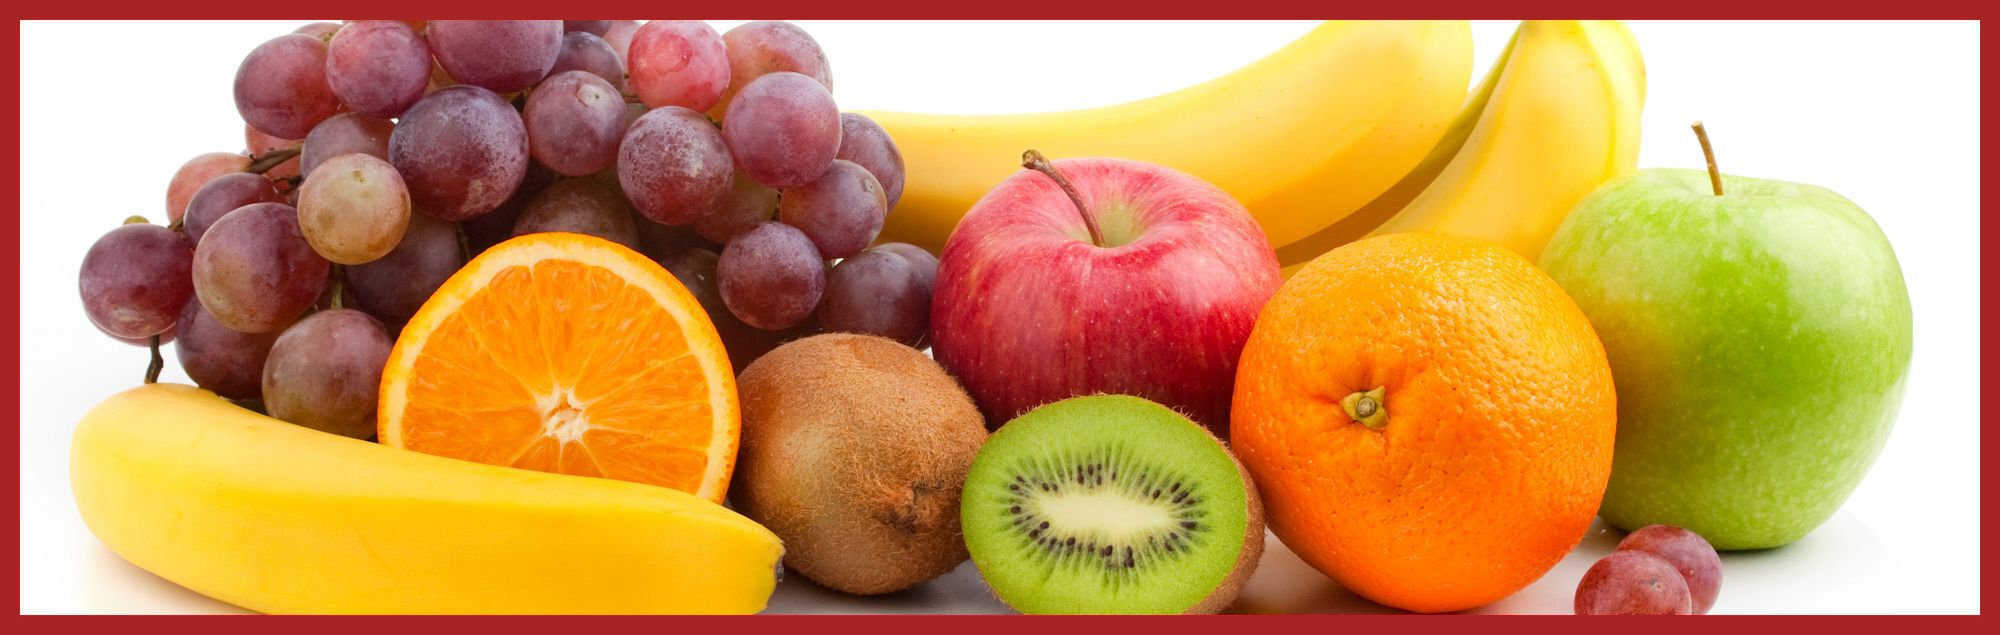 Fruits Meal Component image